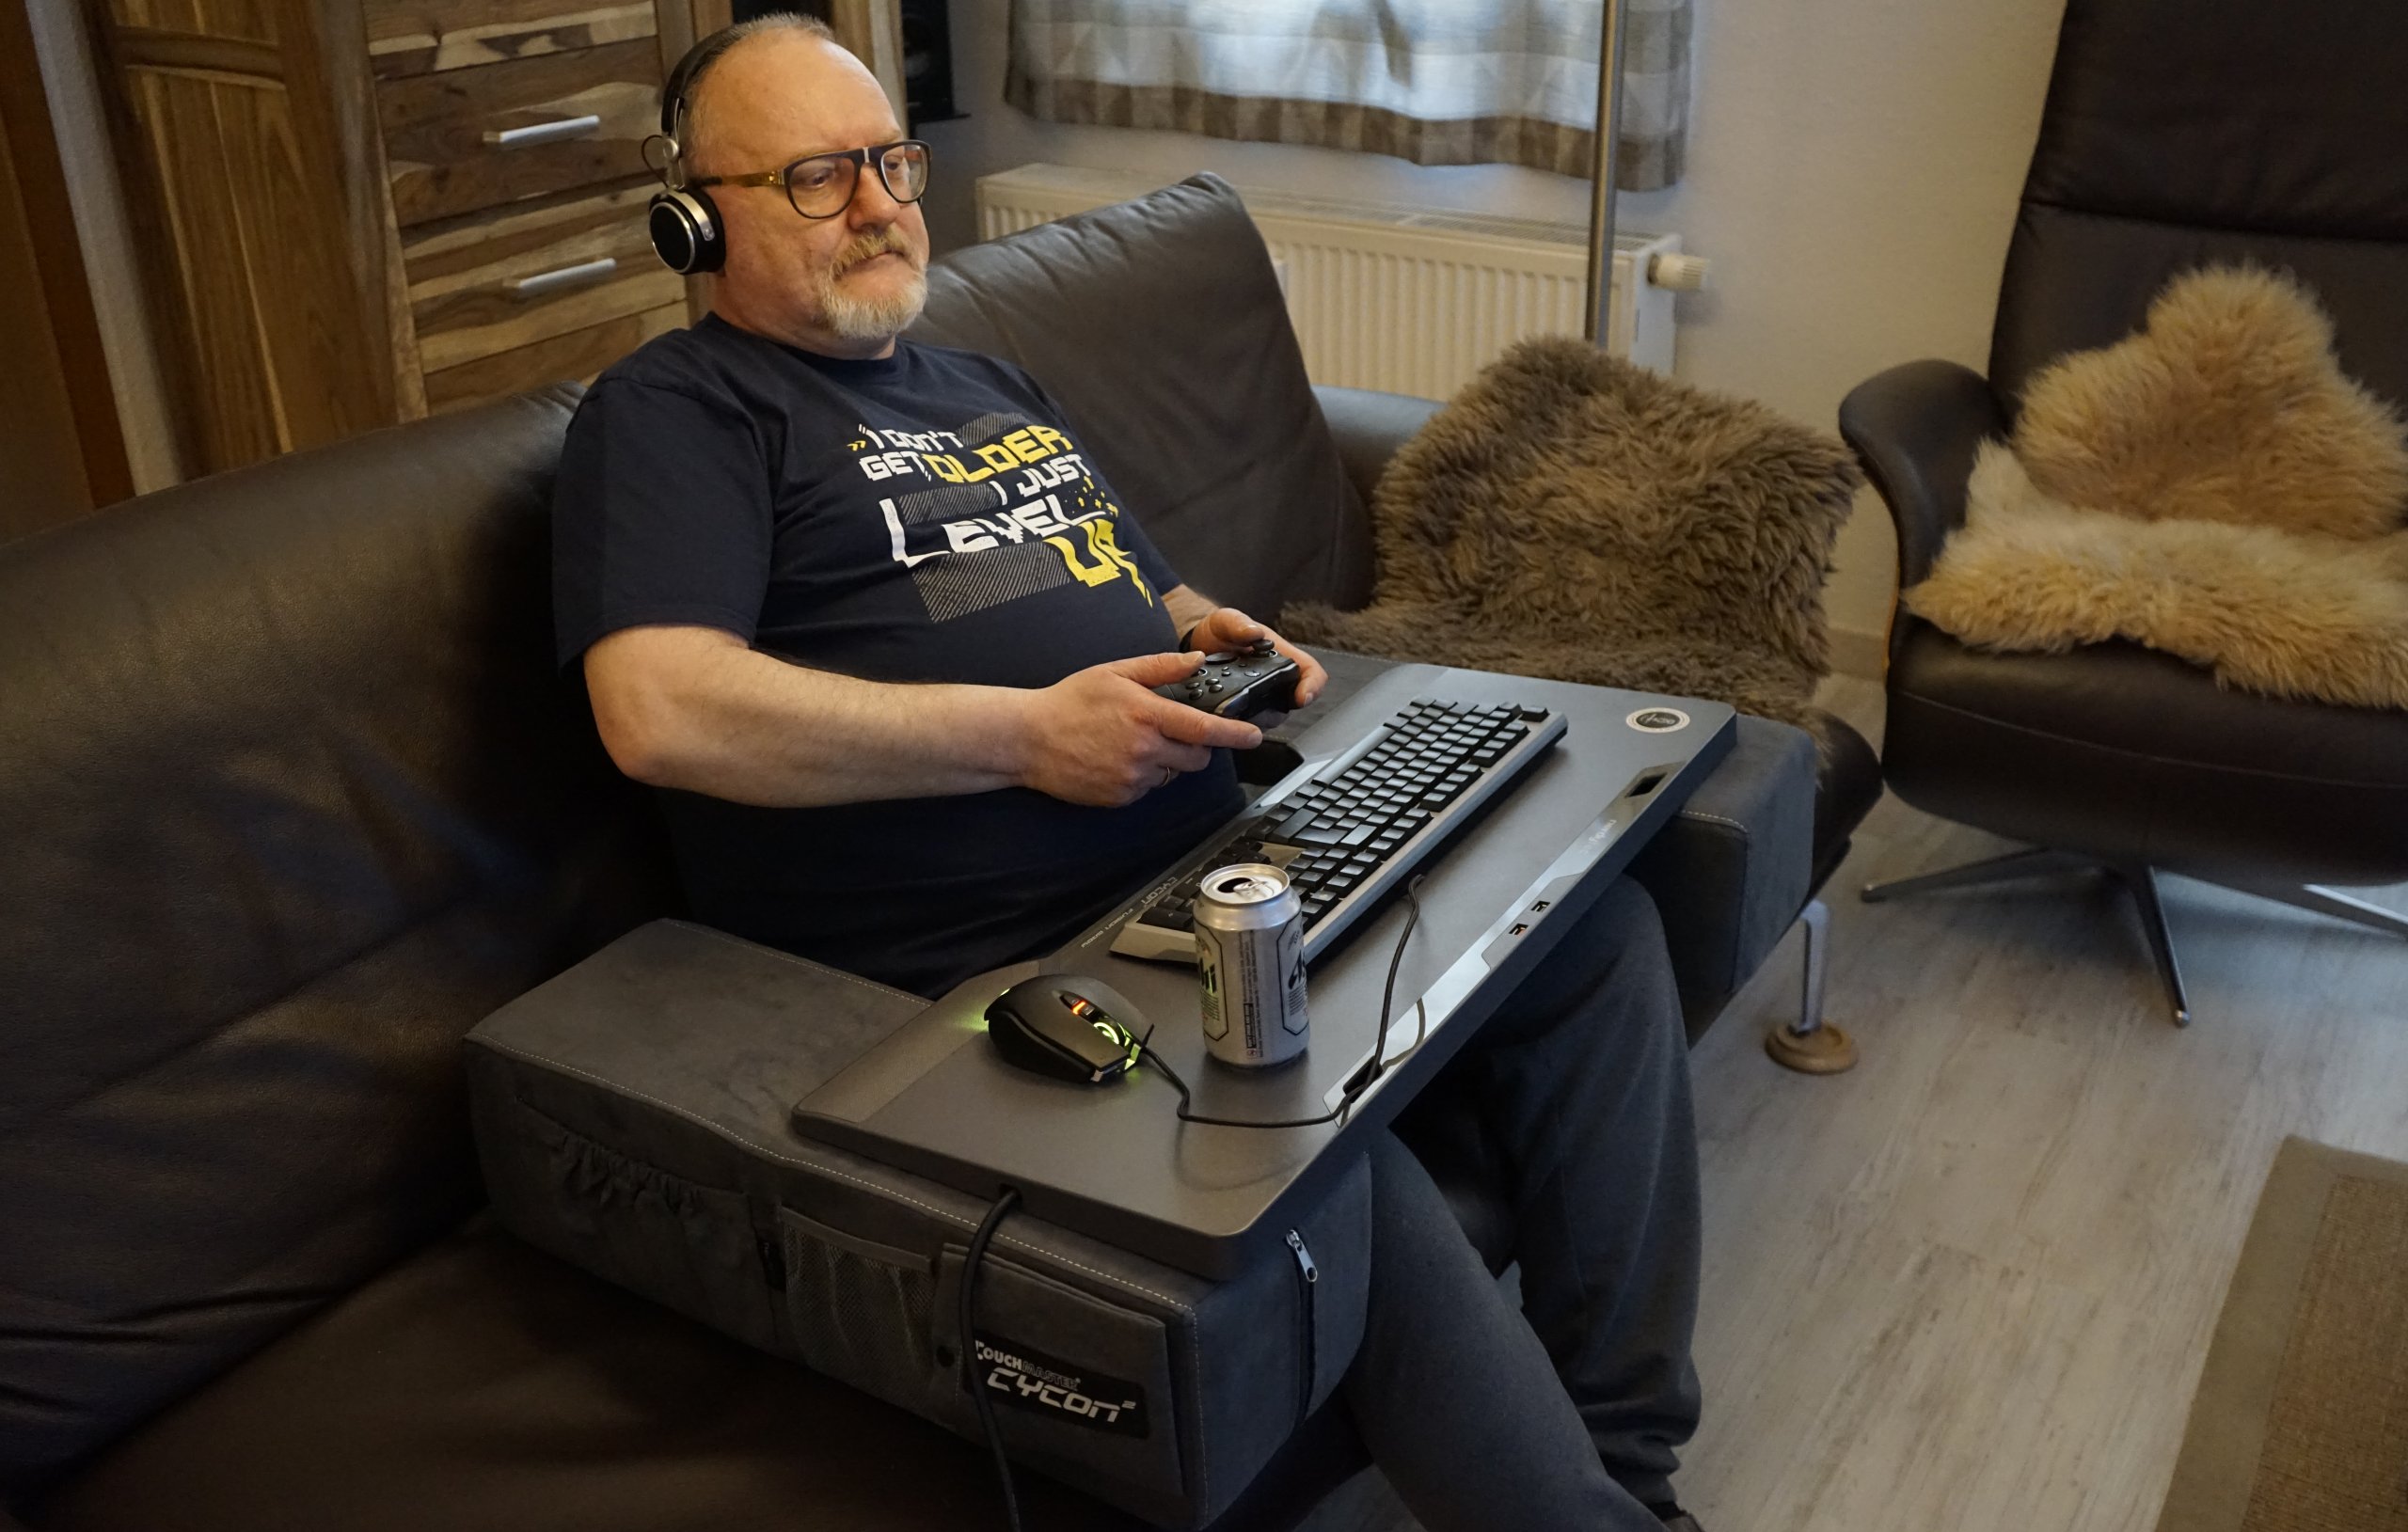 I took my couch gaming setup to the next level (Couchmaster CYCON